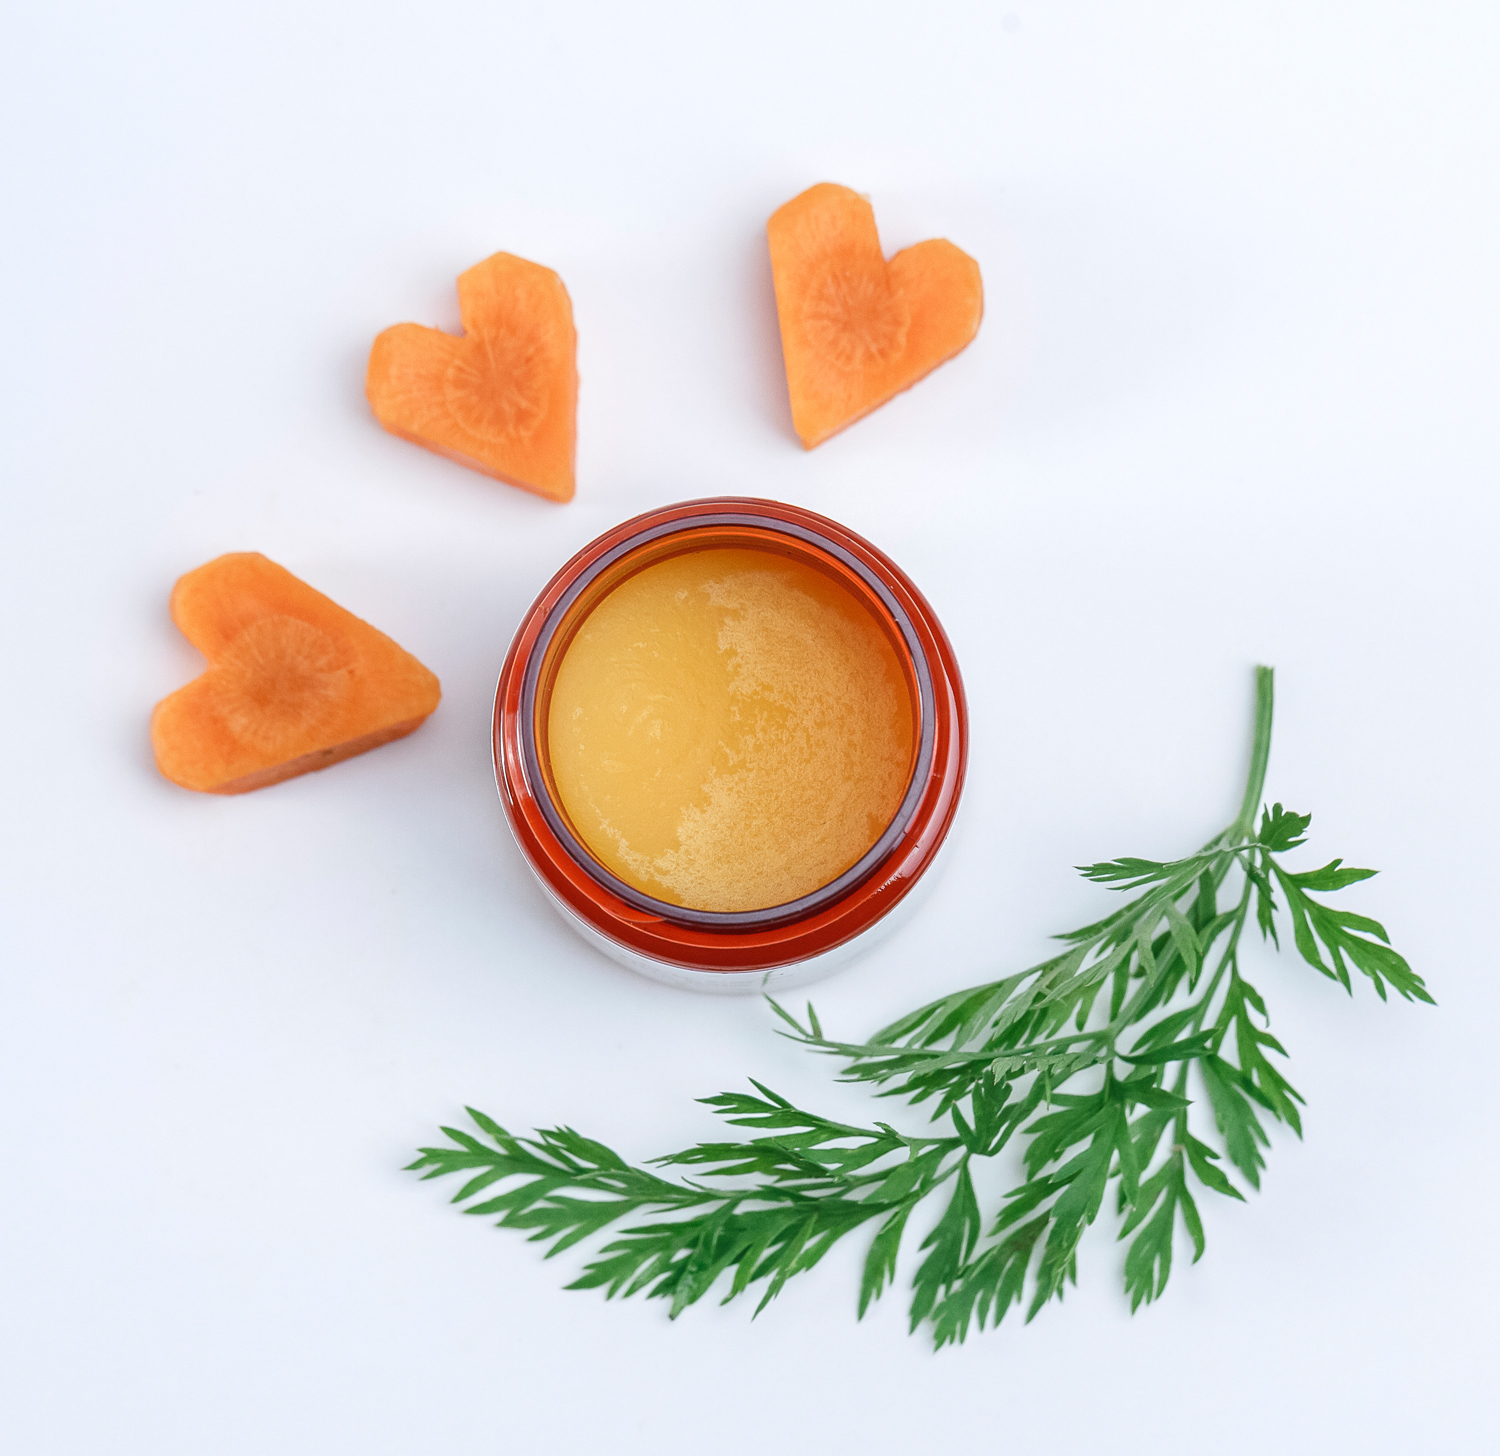 Incredible Carrot Hero Balm with carrot hearts and green tops